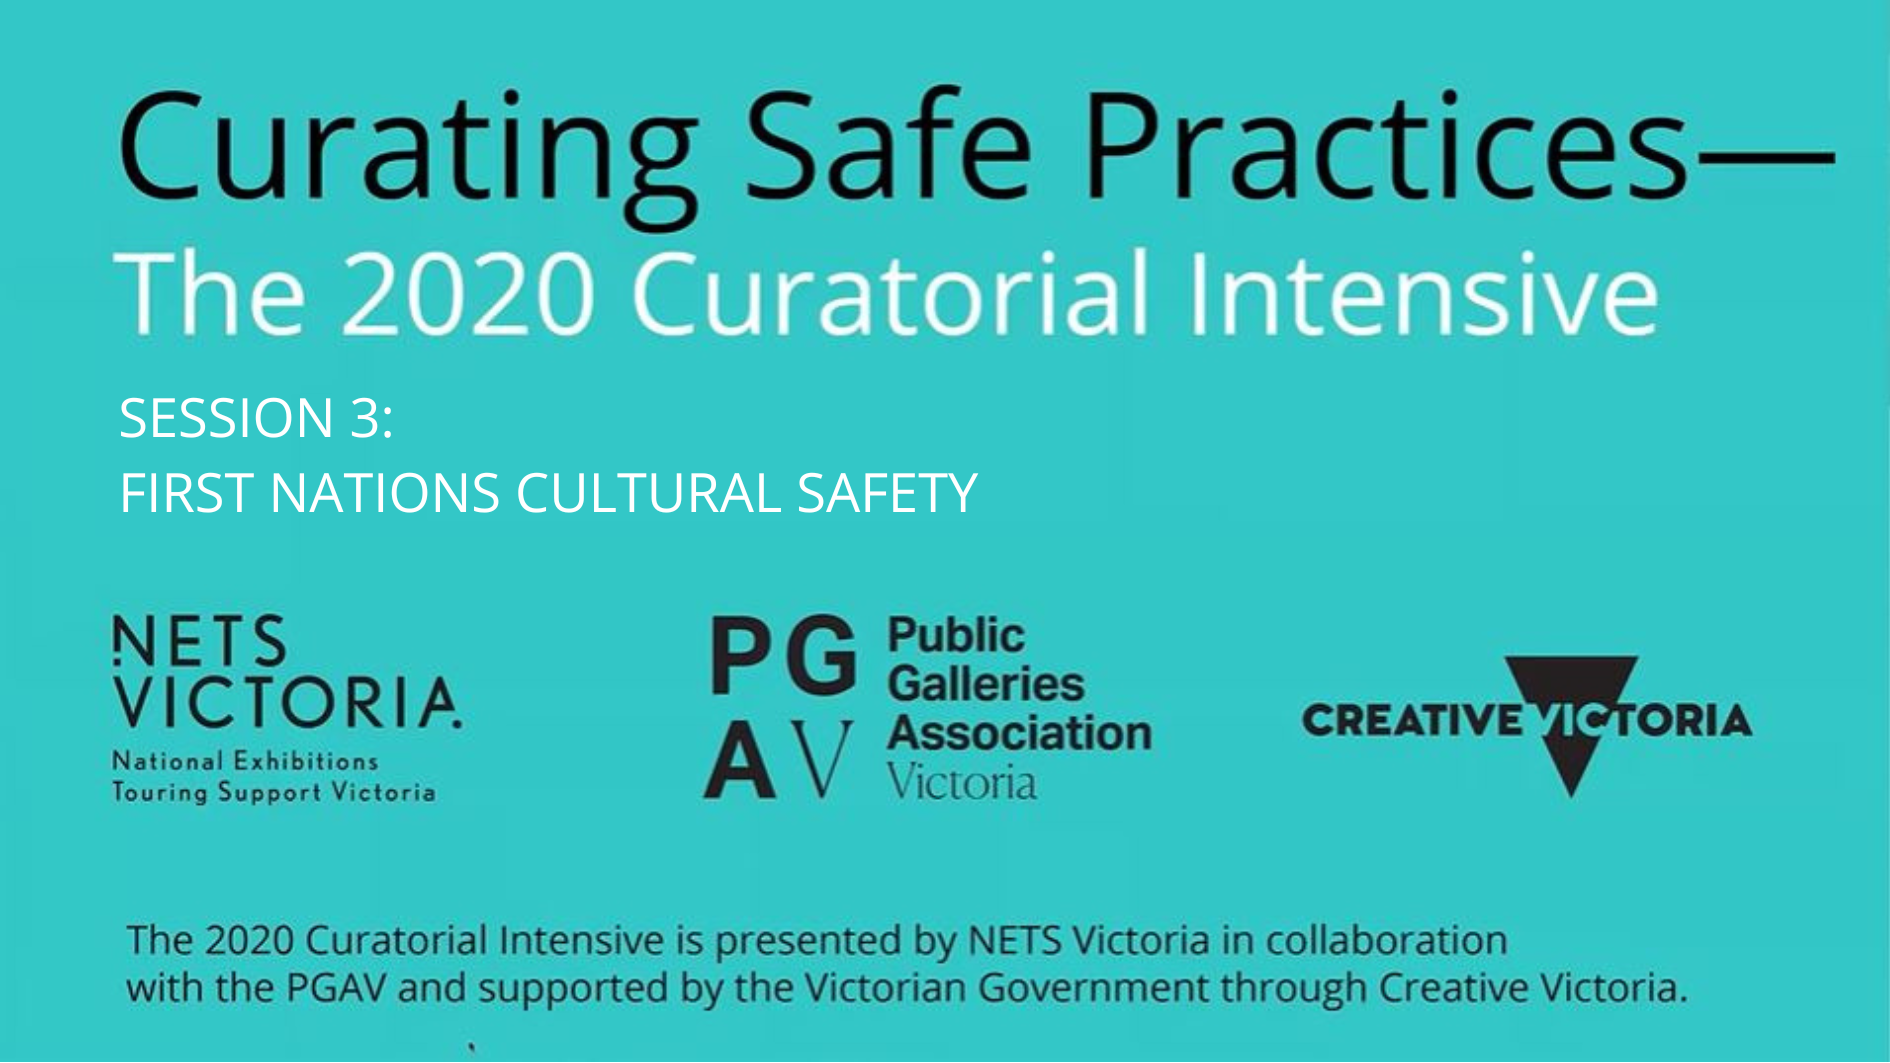 EVENT 2020 CURATORIAL INTENSIVE - SESSION 3